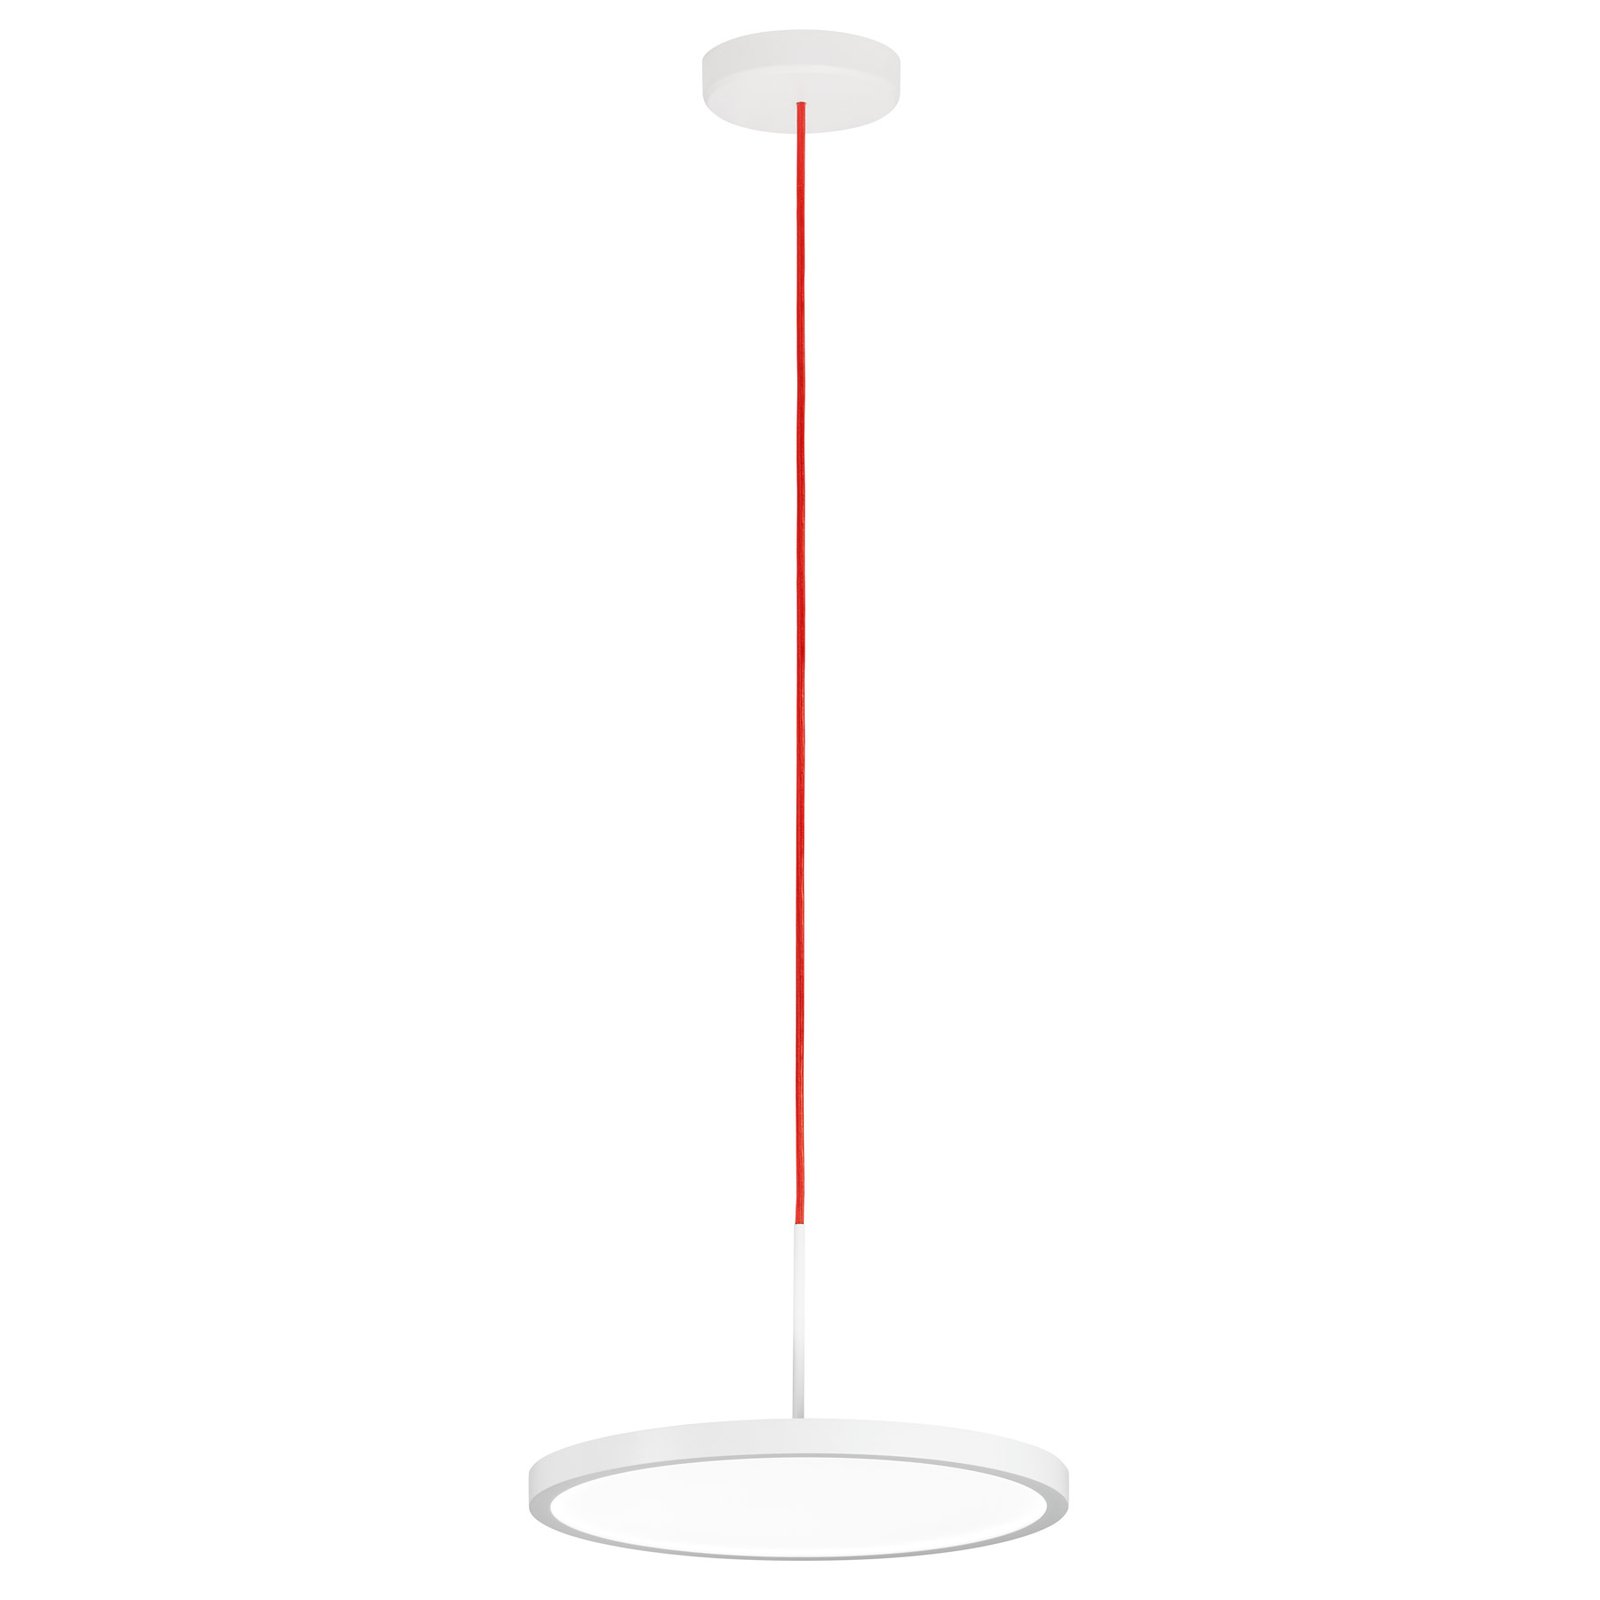 VIVAA 2.0 LED hanging lamp Ø45cm red cable 3,000 K